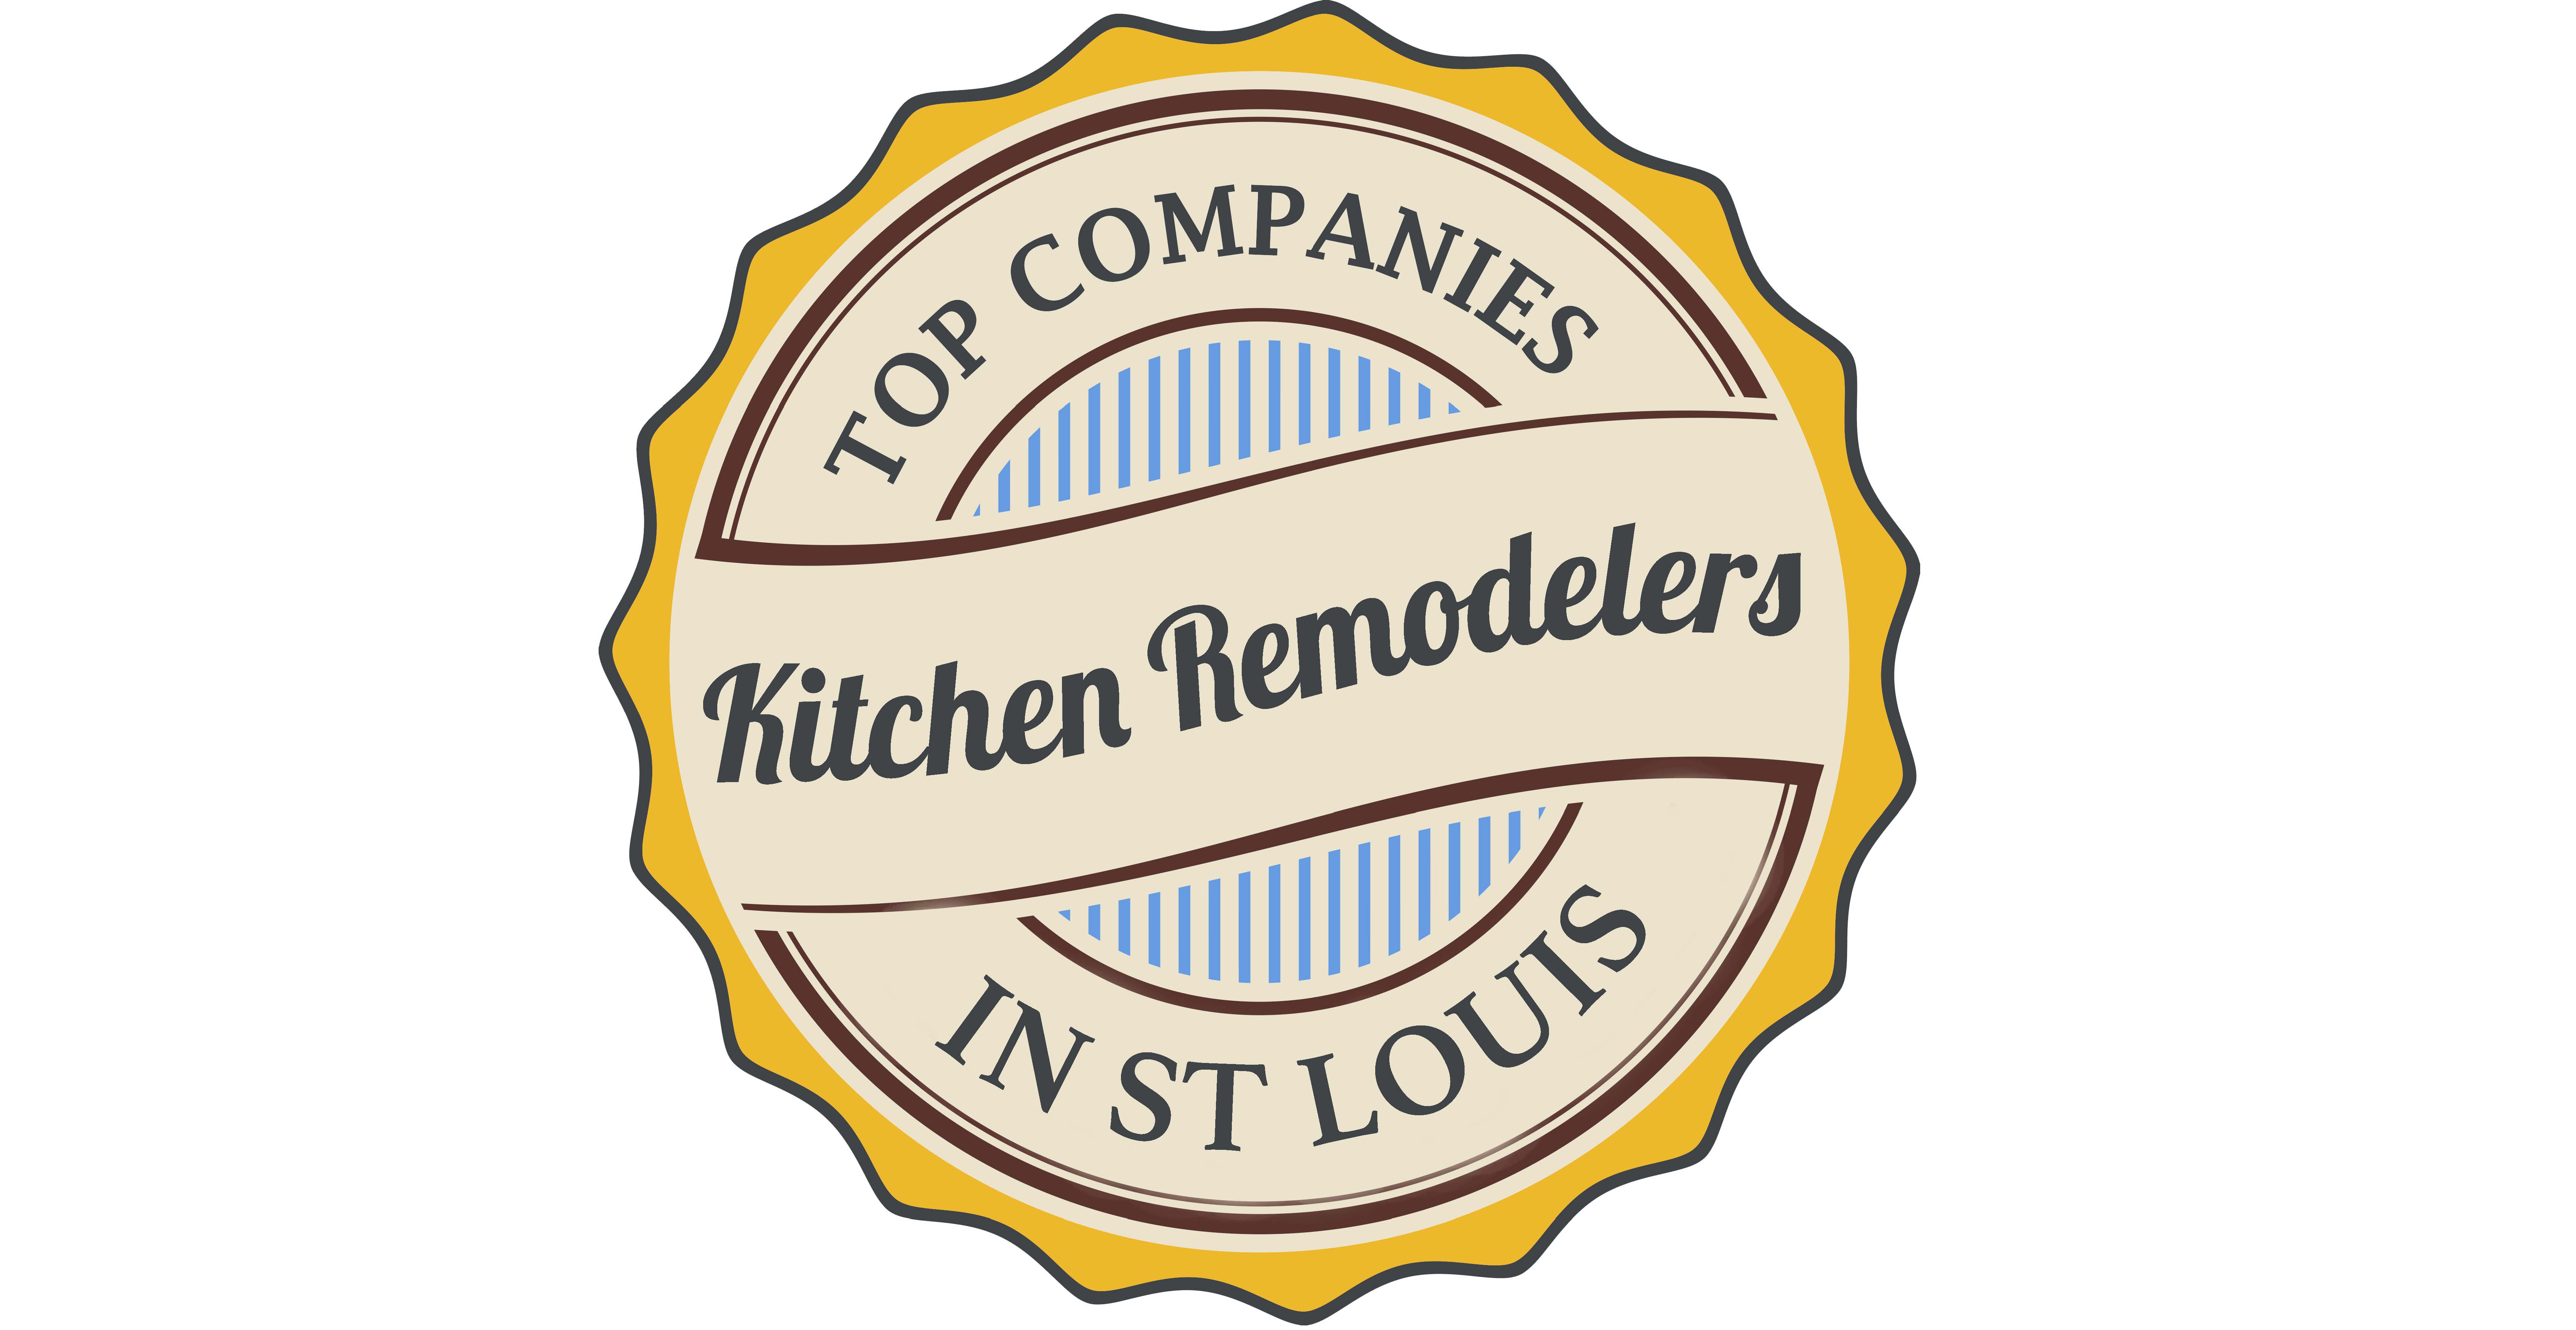 Top 10 St. Louis Kitchen Remodelers